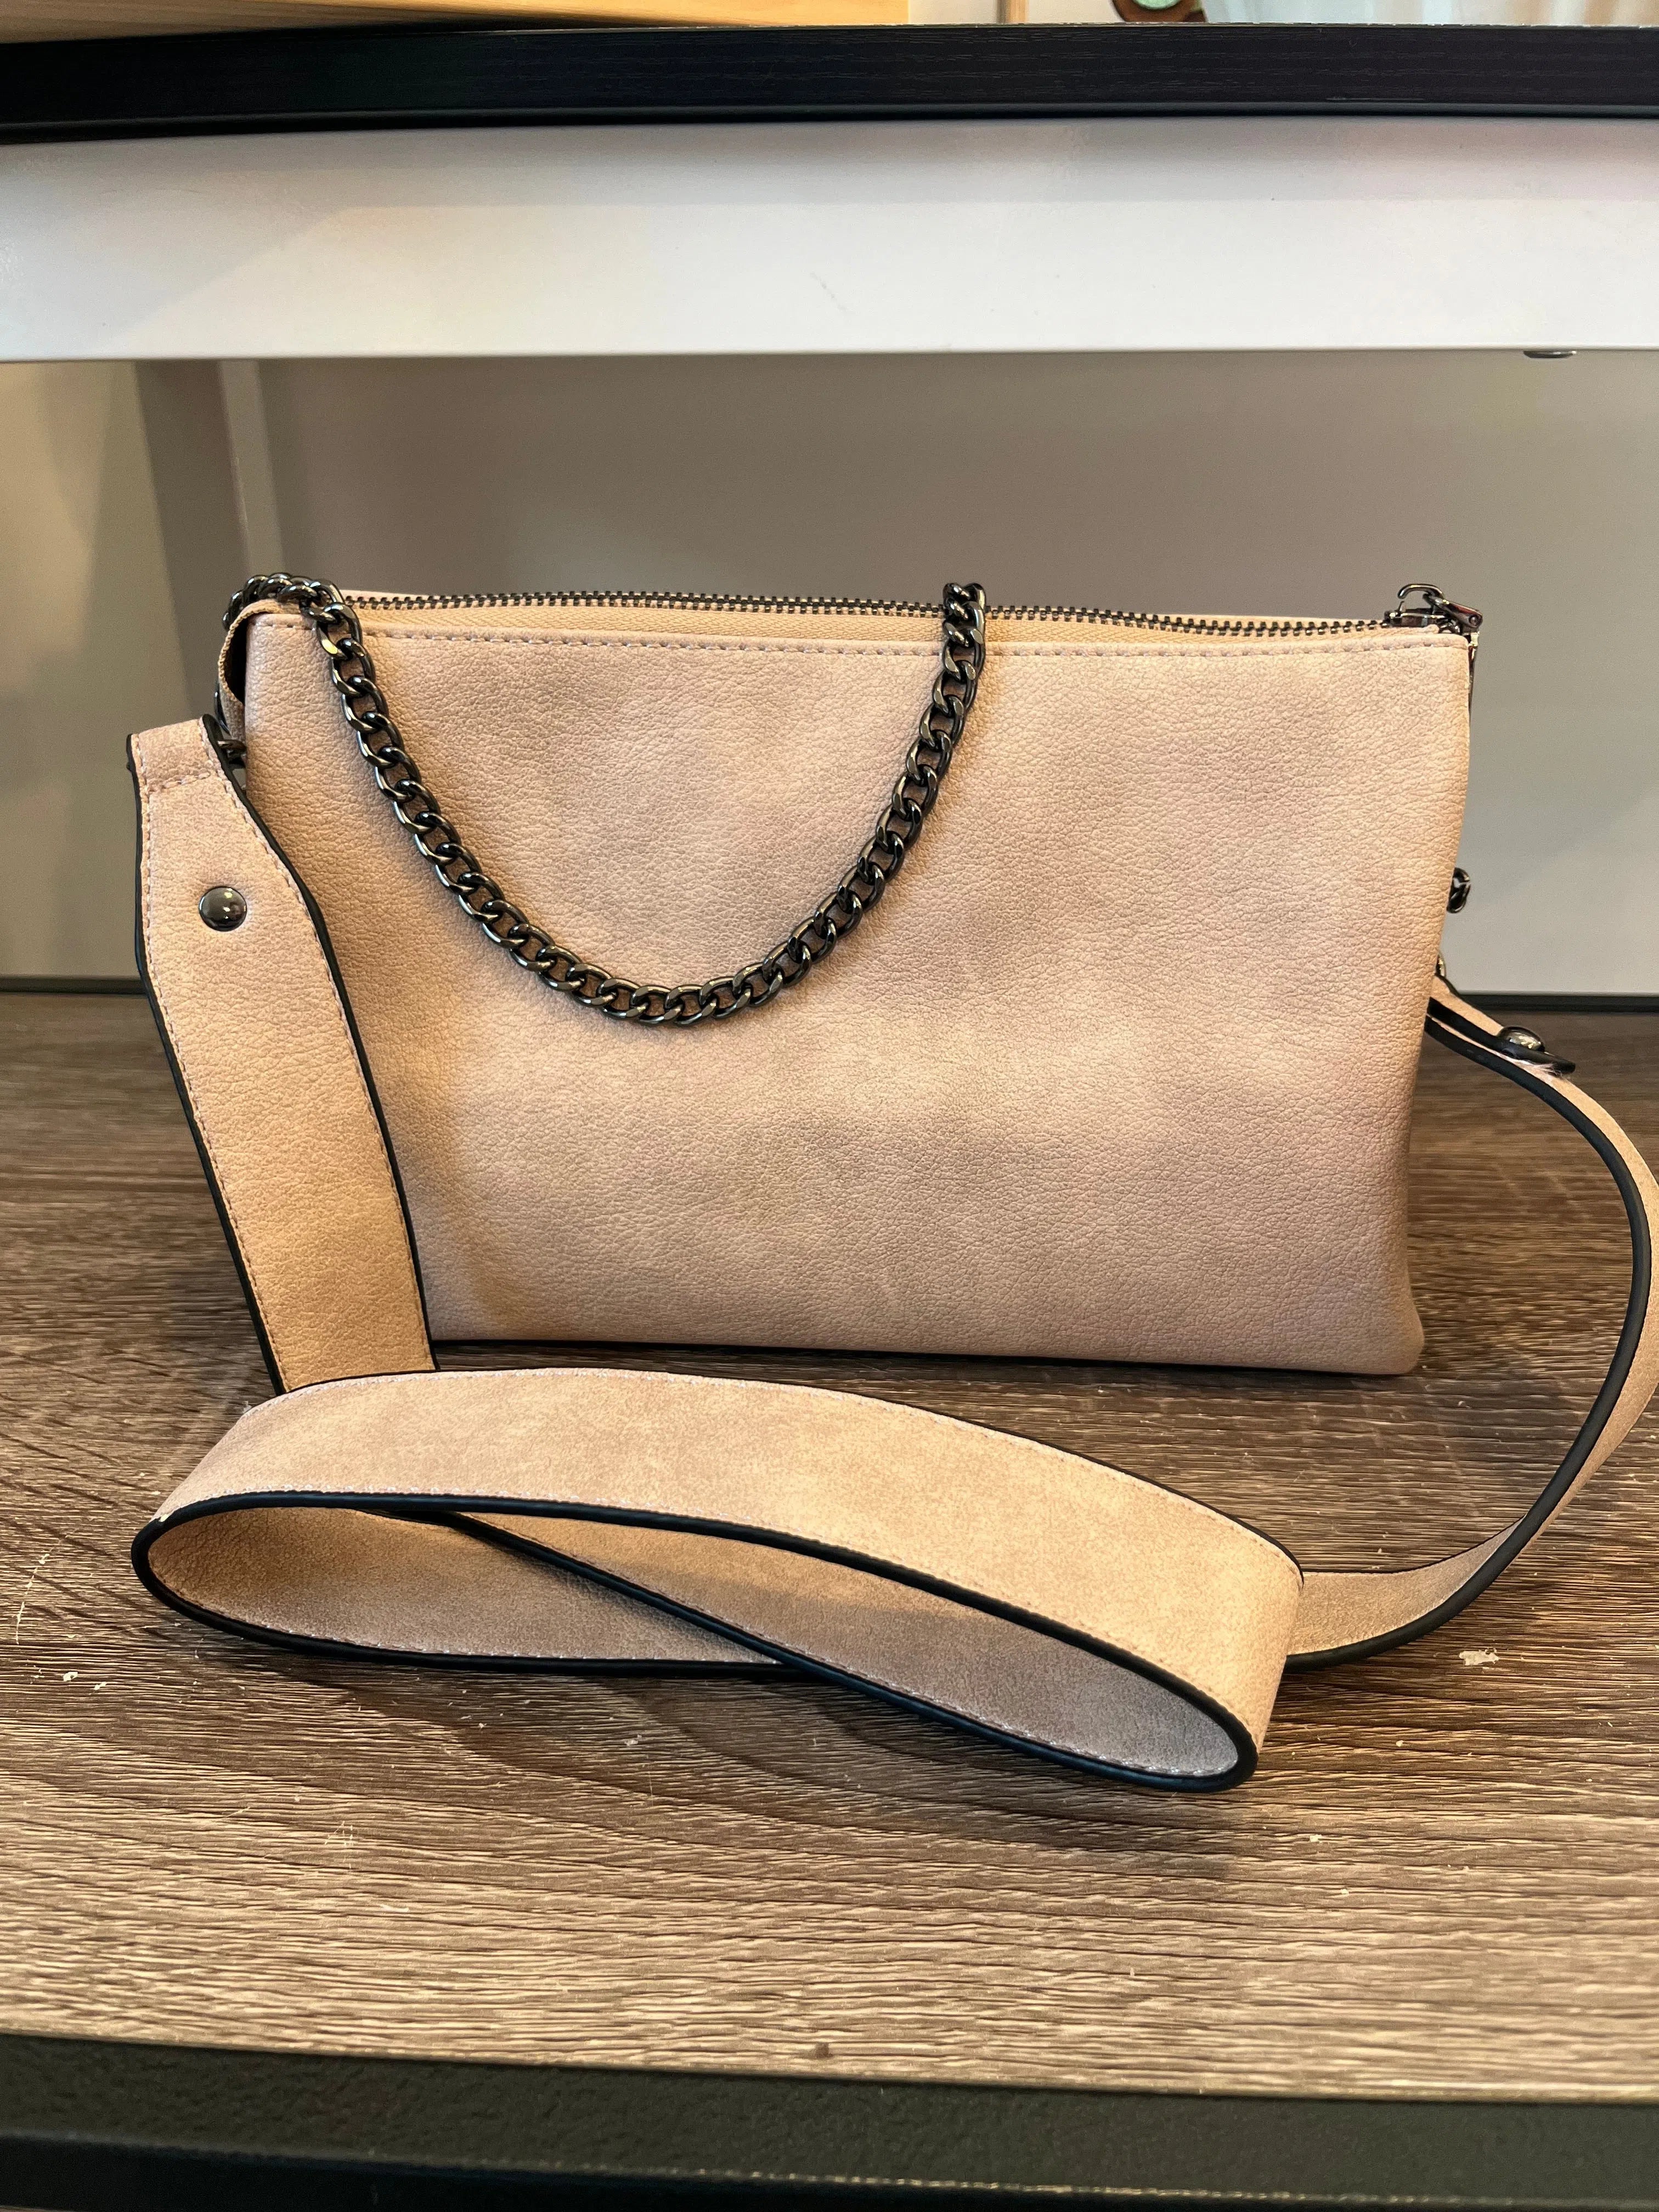 Shop Izzy Crossbody with Chain Strap-Purse at Ruby Joy Boutique, a Women's Clothing Store in Pickerington, Ohio